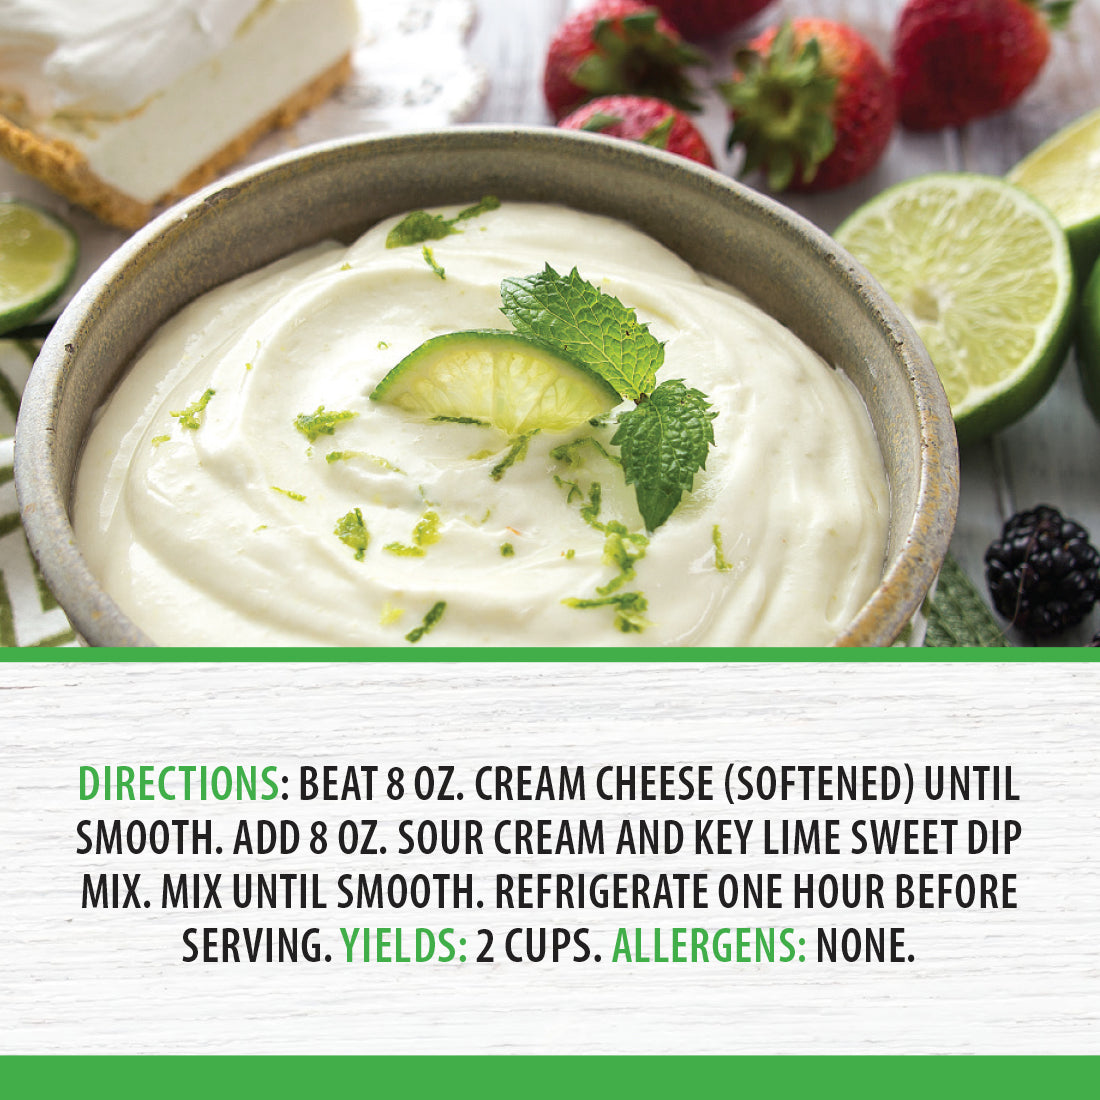 Key Lime Sweet Dip garnished with lime wedges.